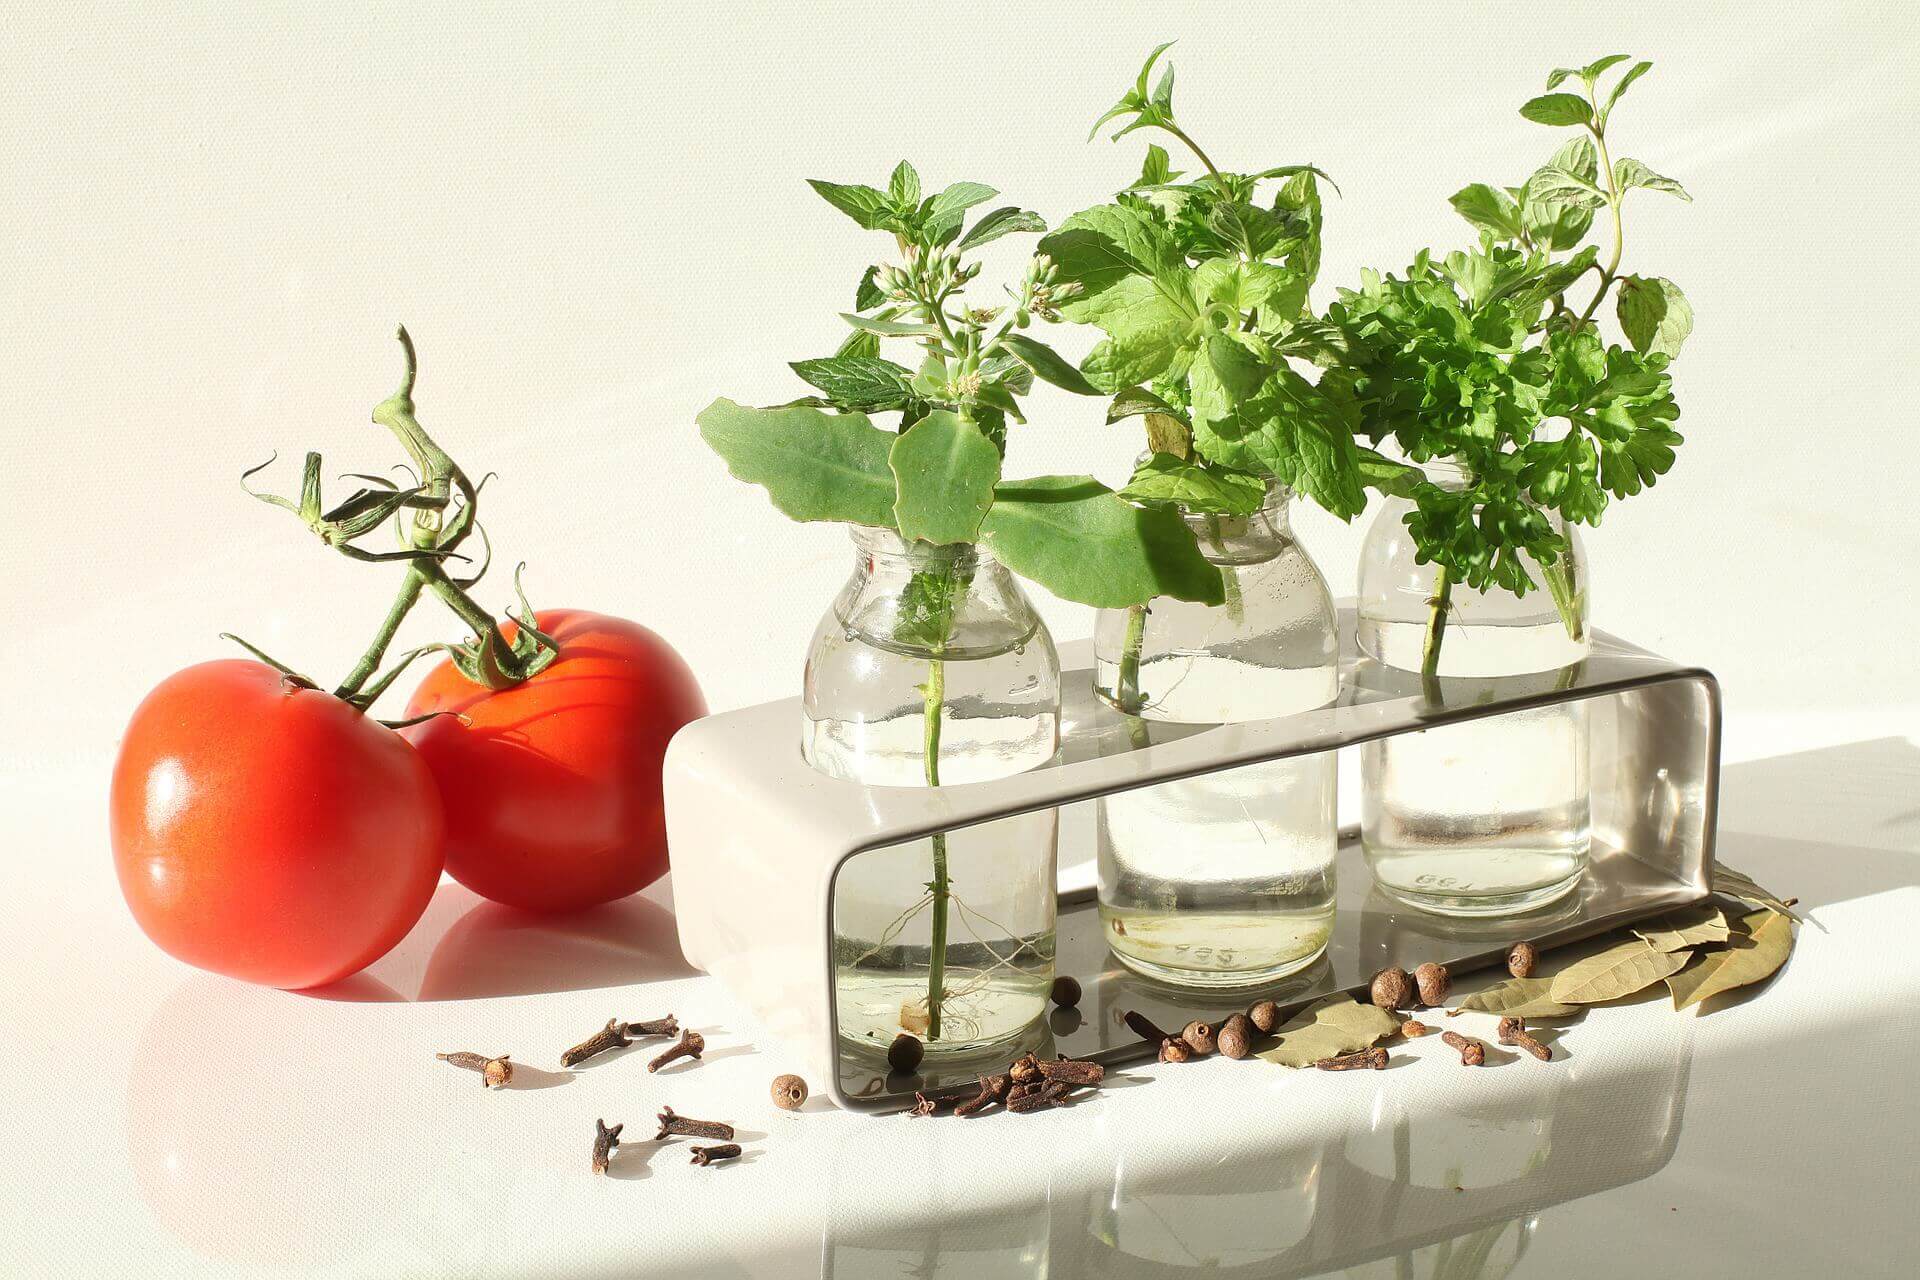 Tomatoes plants in bottles of water